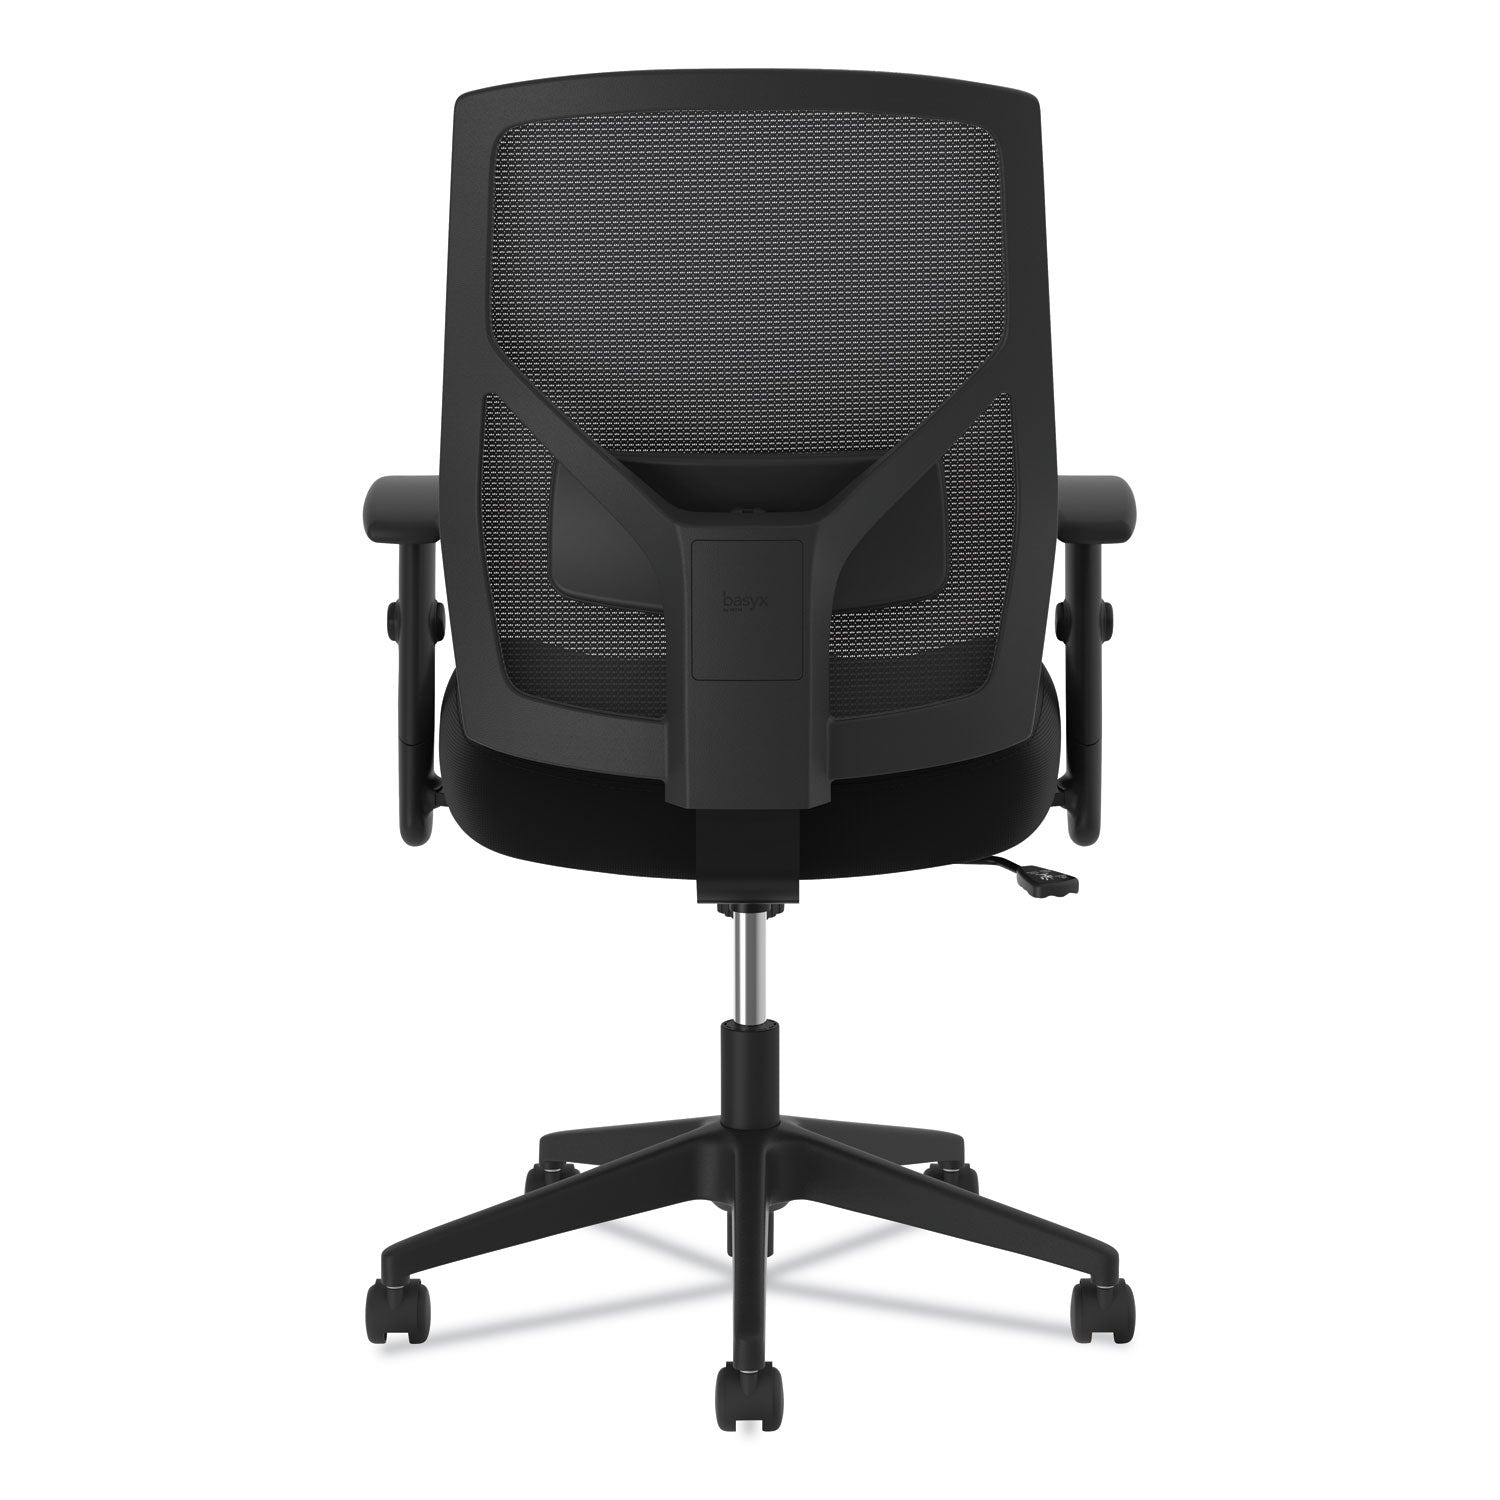 vl581-high-back-task-chair-supports-up-to-250-lb-18-to-22-seat-height-black_bsxvl581es10t - 6